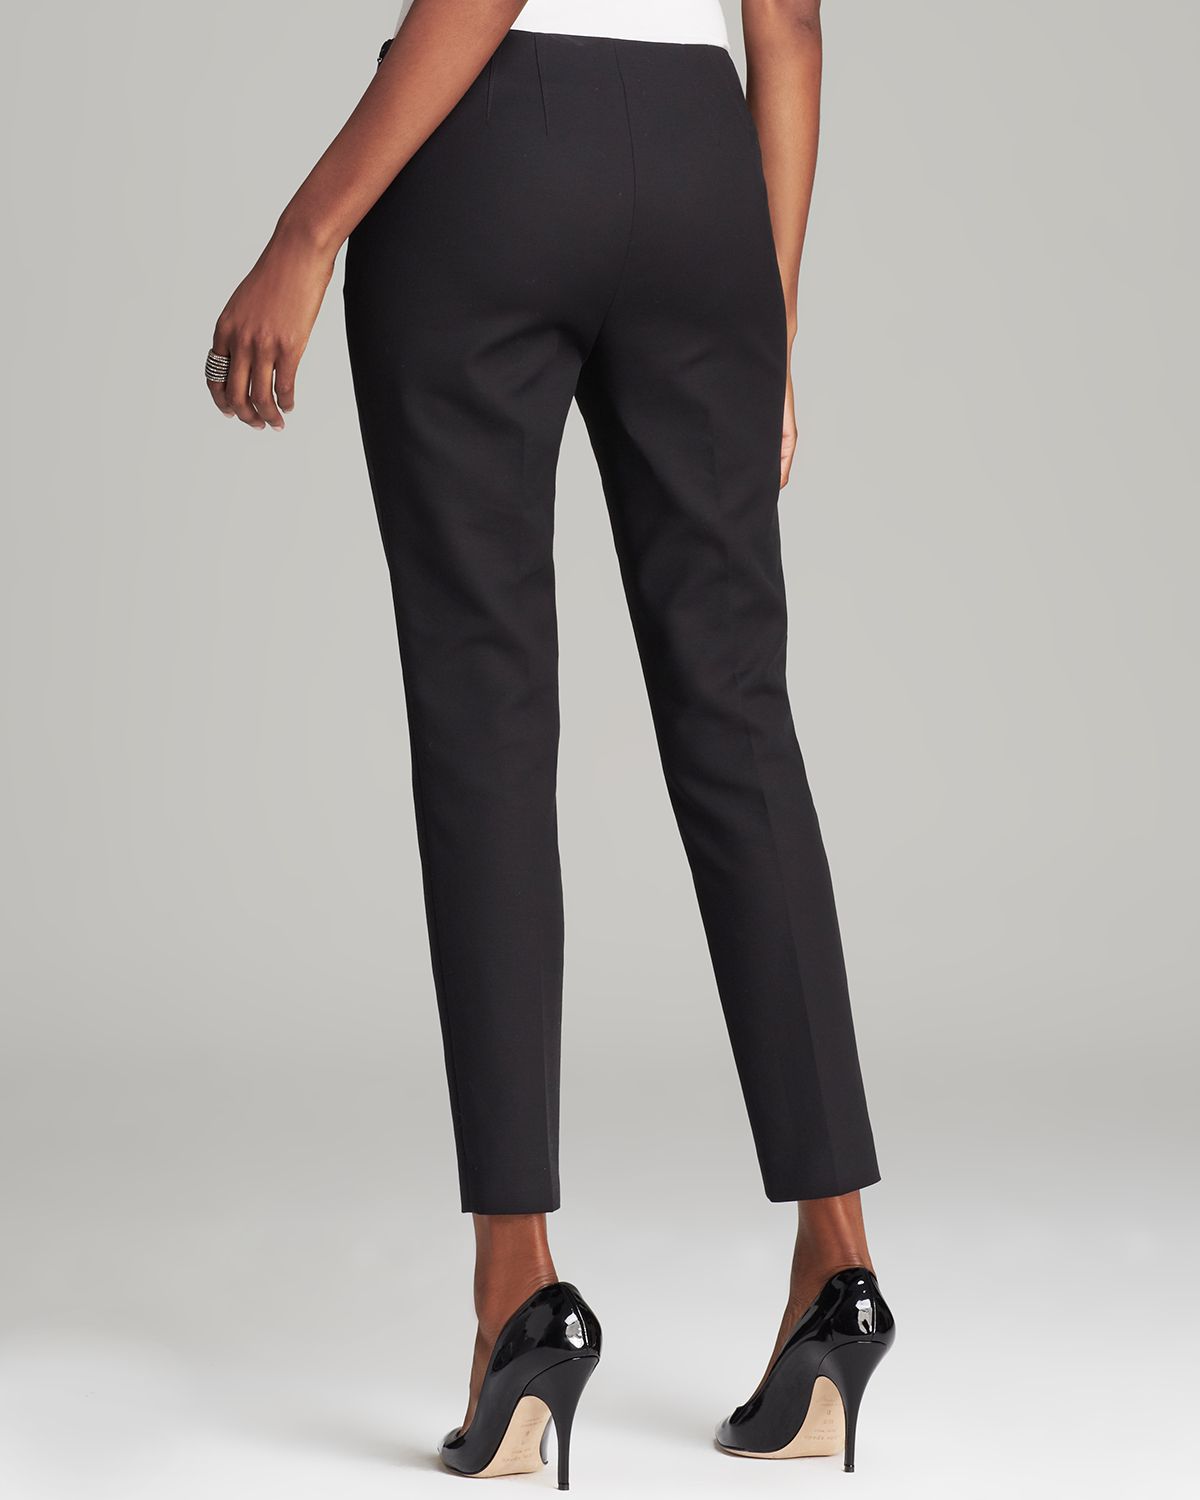 Vince Camuto Side Zip Ankle Pants in Black - Lyst